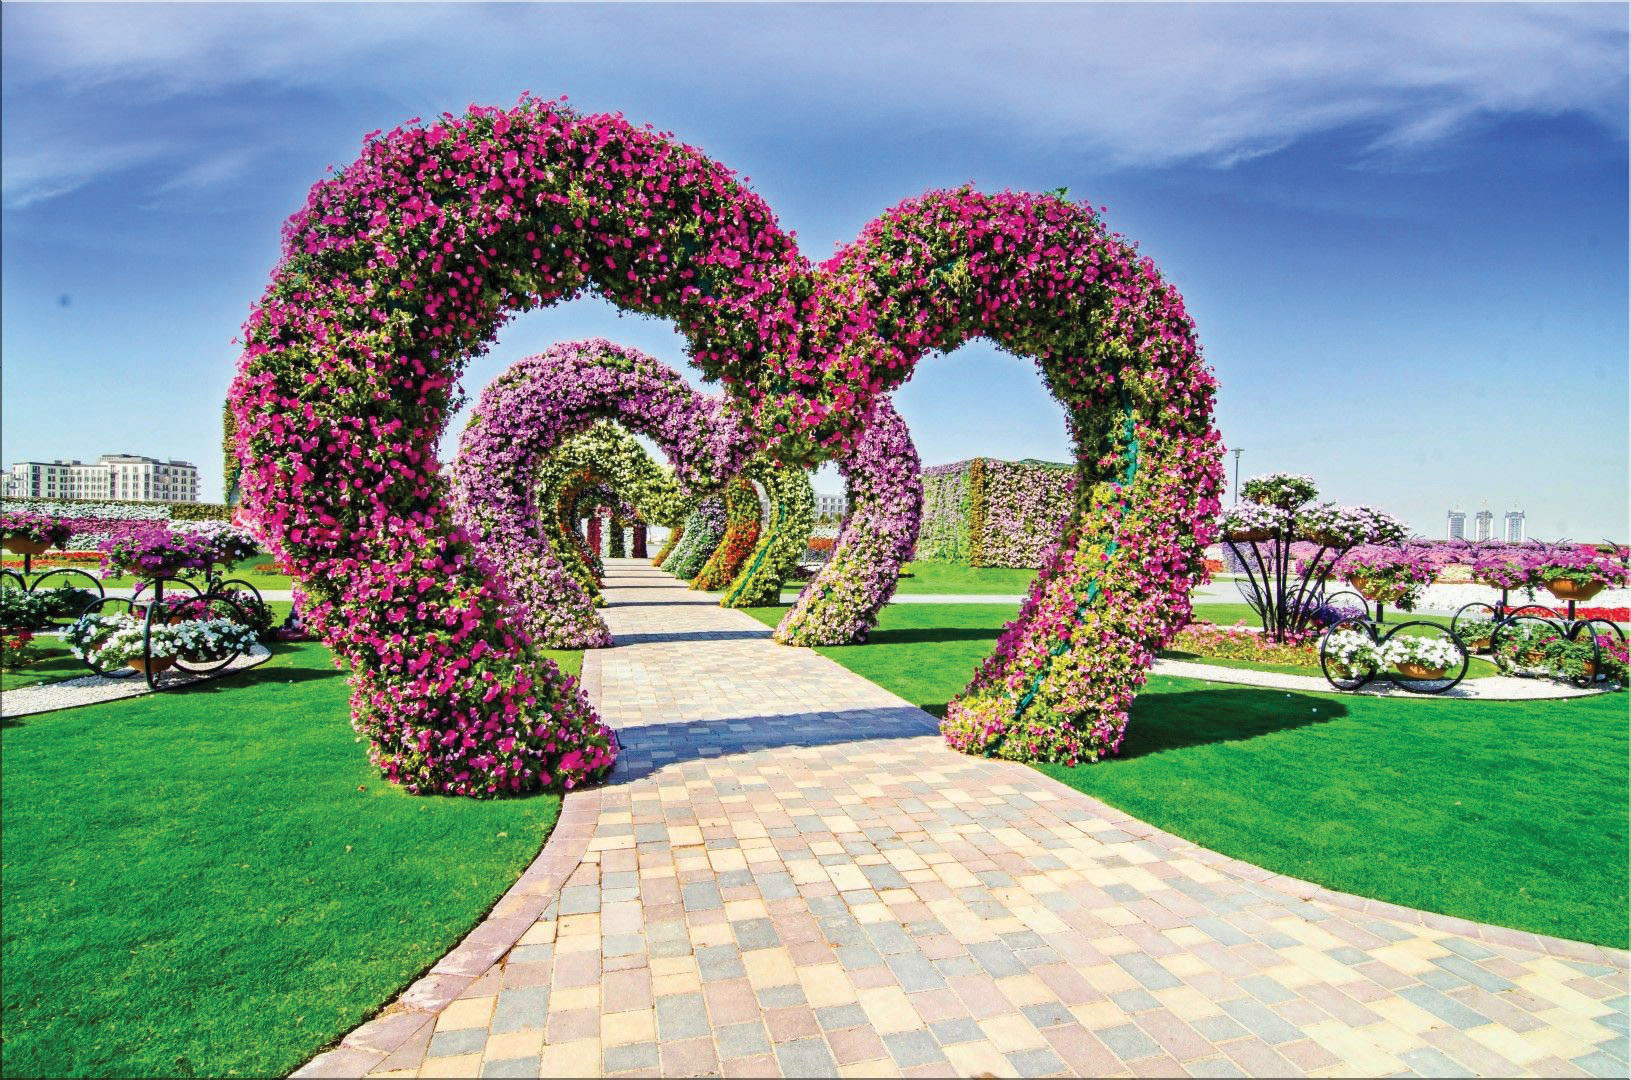 Visiting the Dubai Miracle Garden + 25 Pictures That'll Inspire Your Visit  - My Toronto, My World